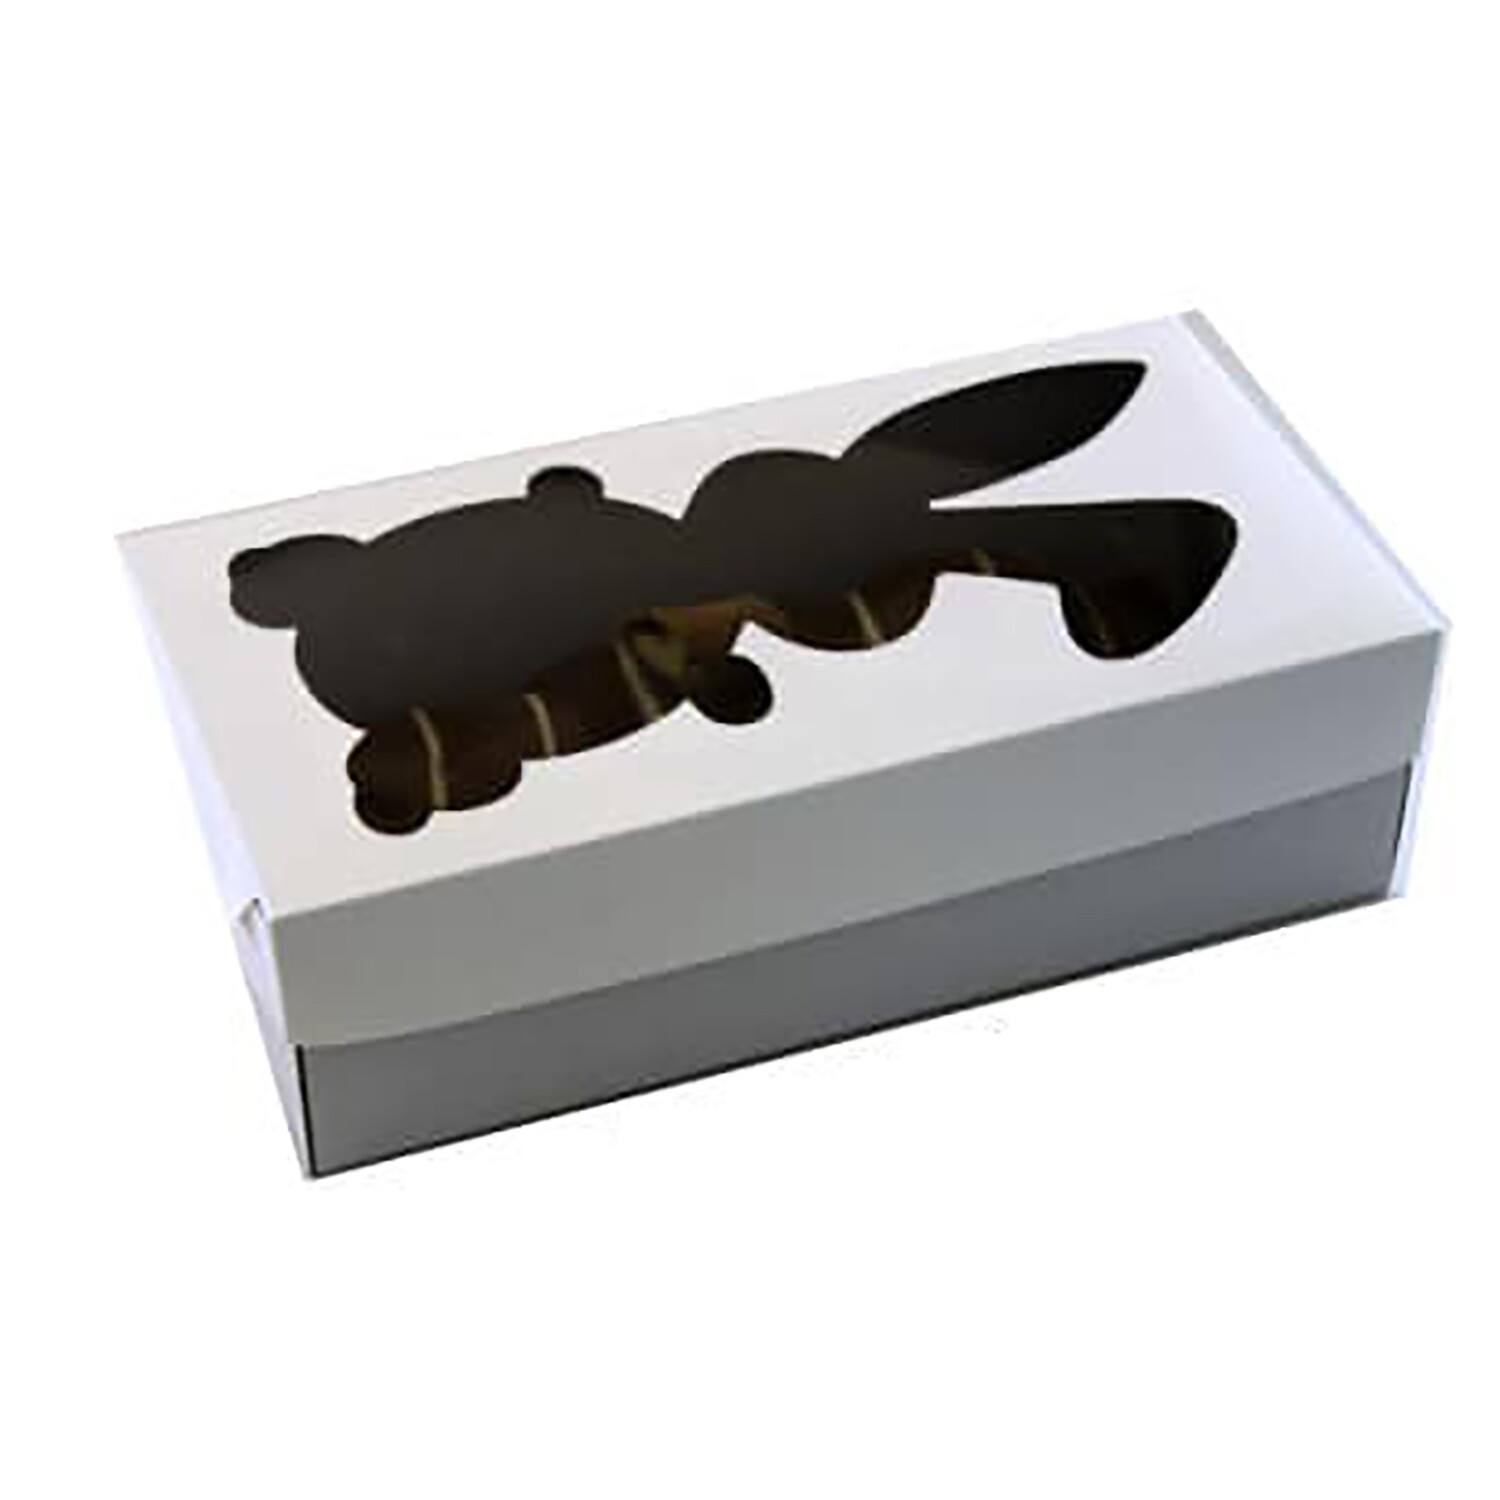 Bunny Box for Sweet Bread -WHITE -Κουτί για Τσουρέκι -ΚΟΥΝΕΛΑΚΙ ΛΕΥΚΟ